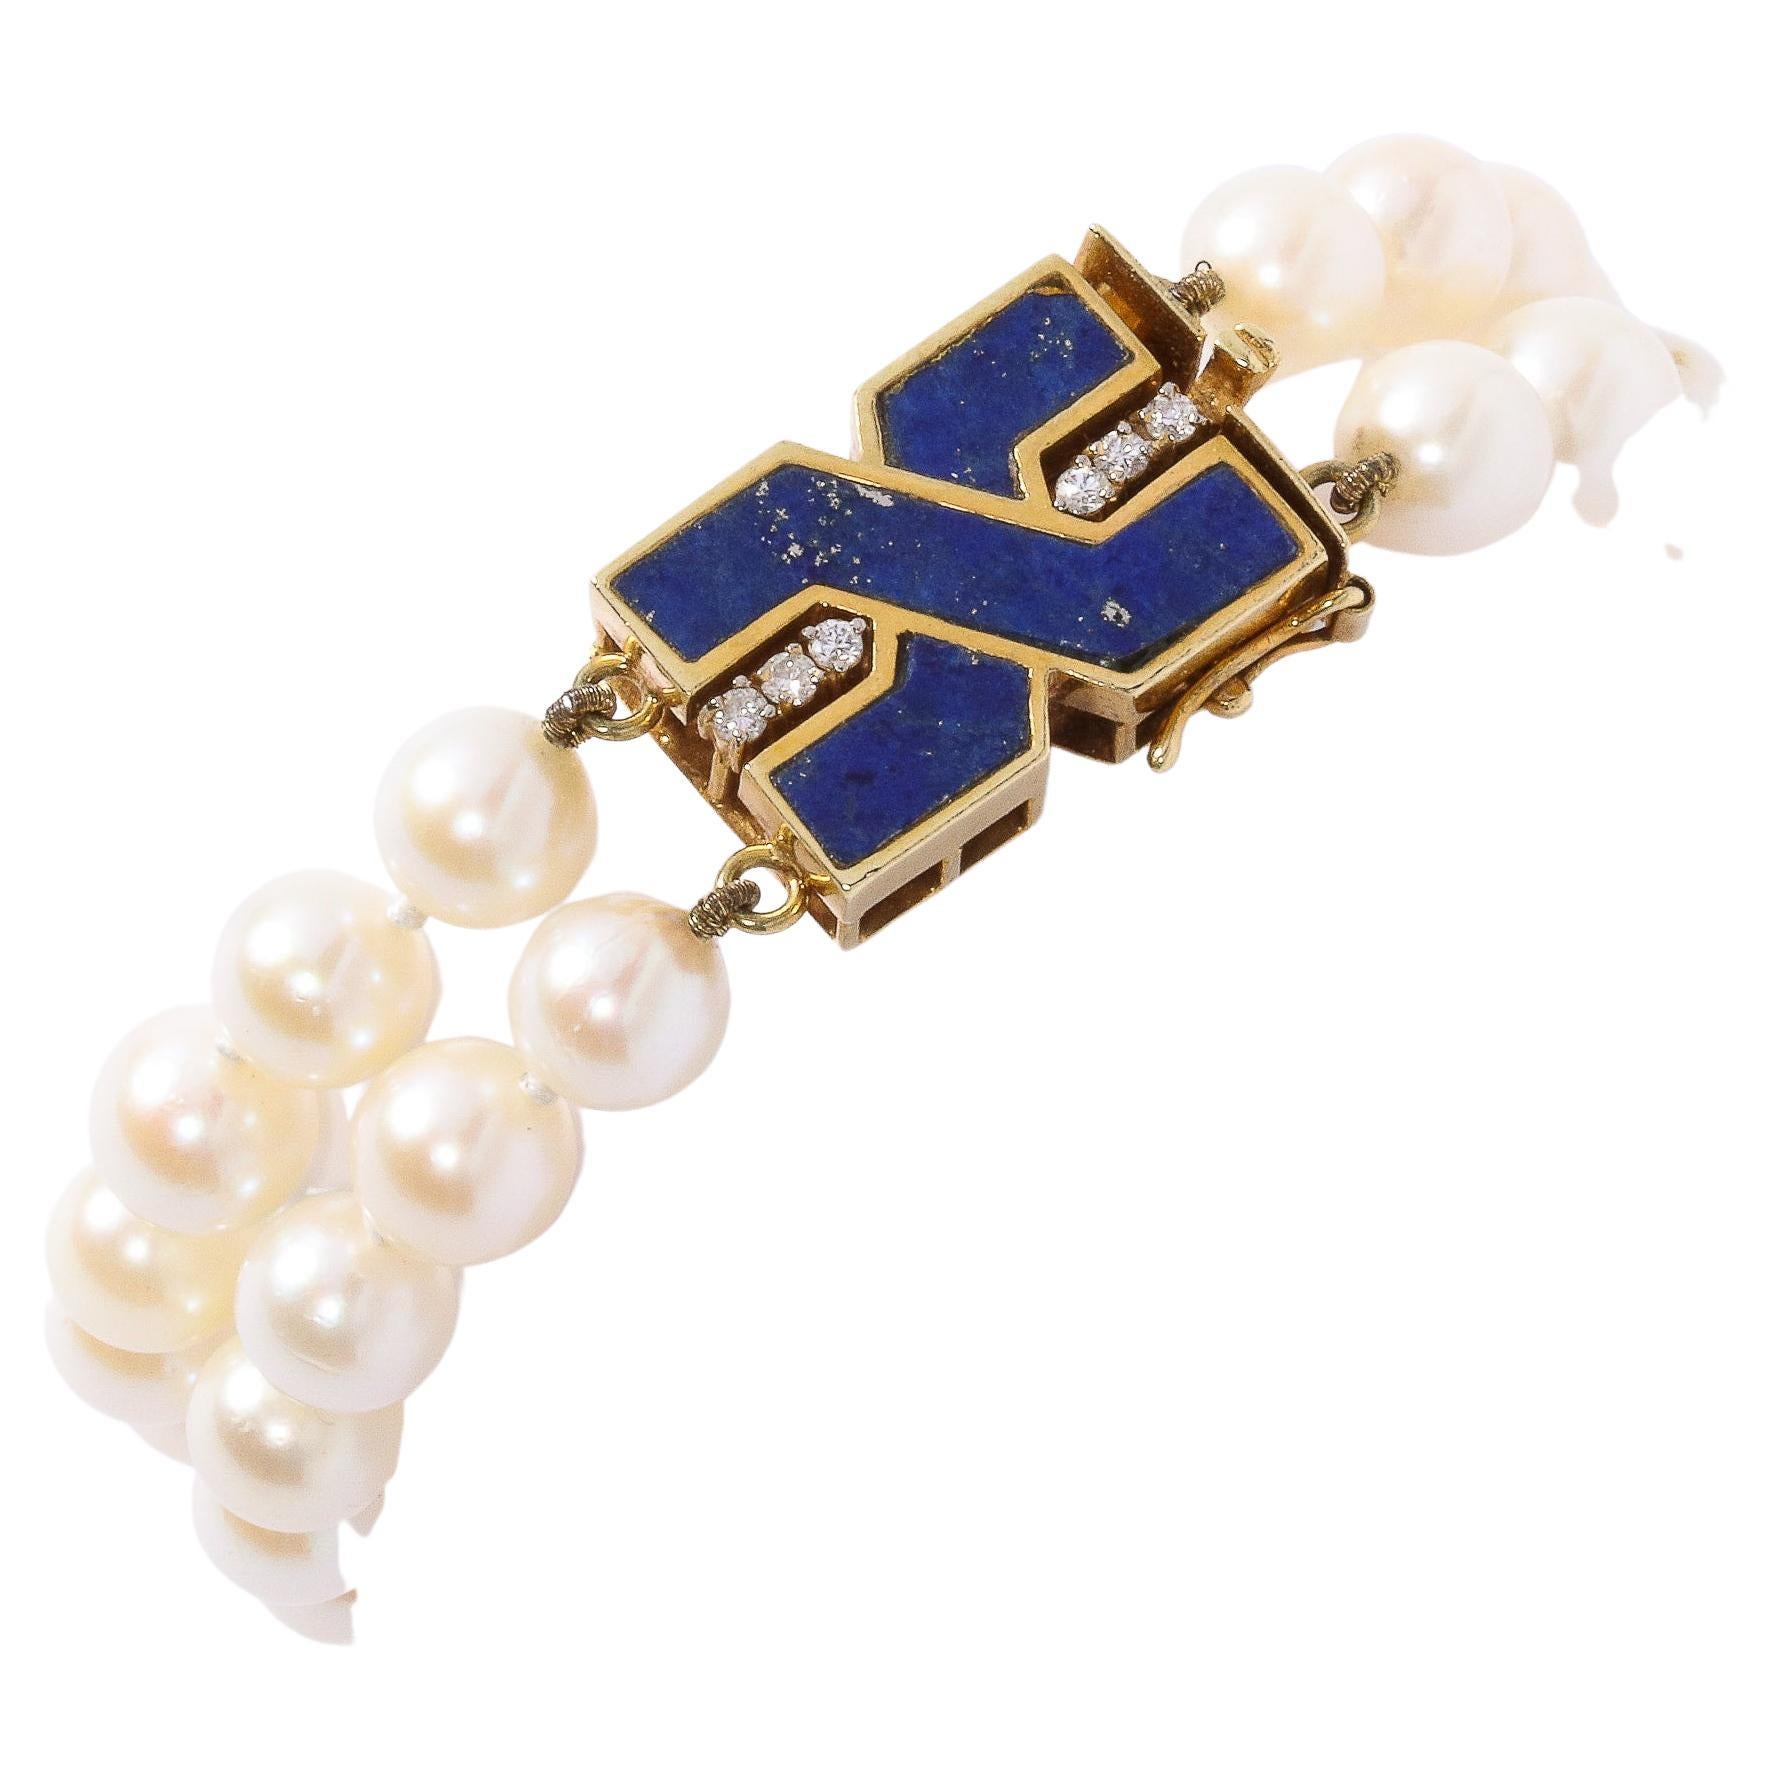 Modernist Double Strand Pearl Bracelet with Lapis, Gold and Diamond Clasp